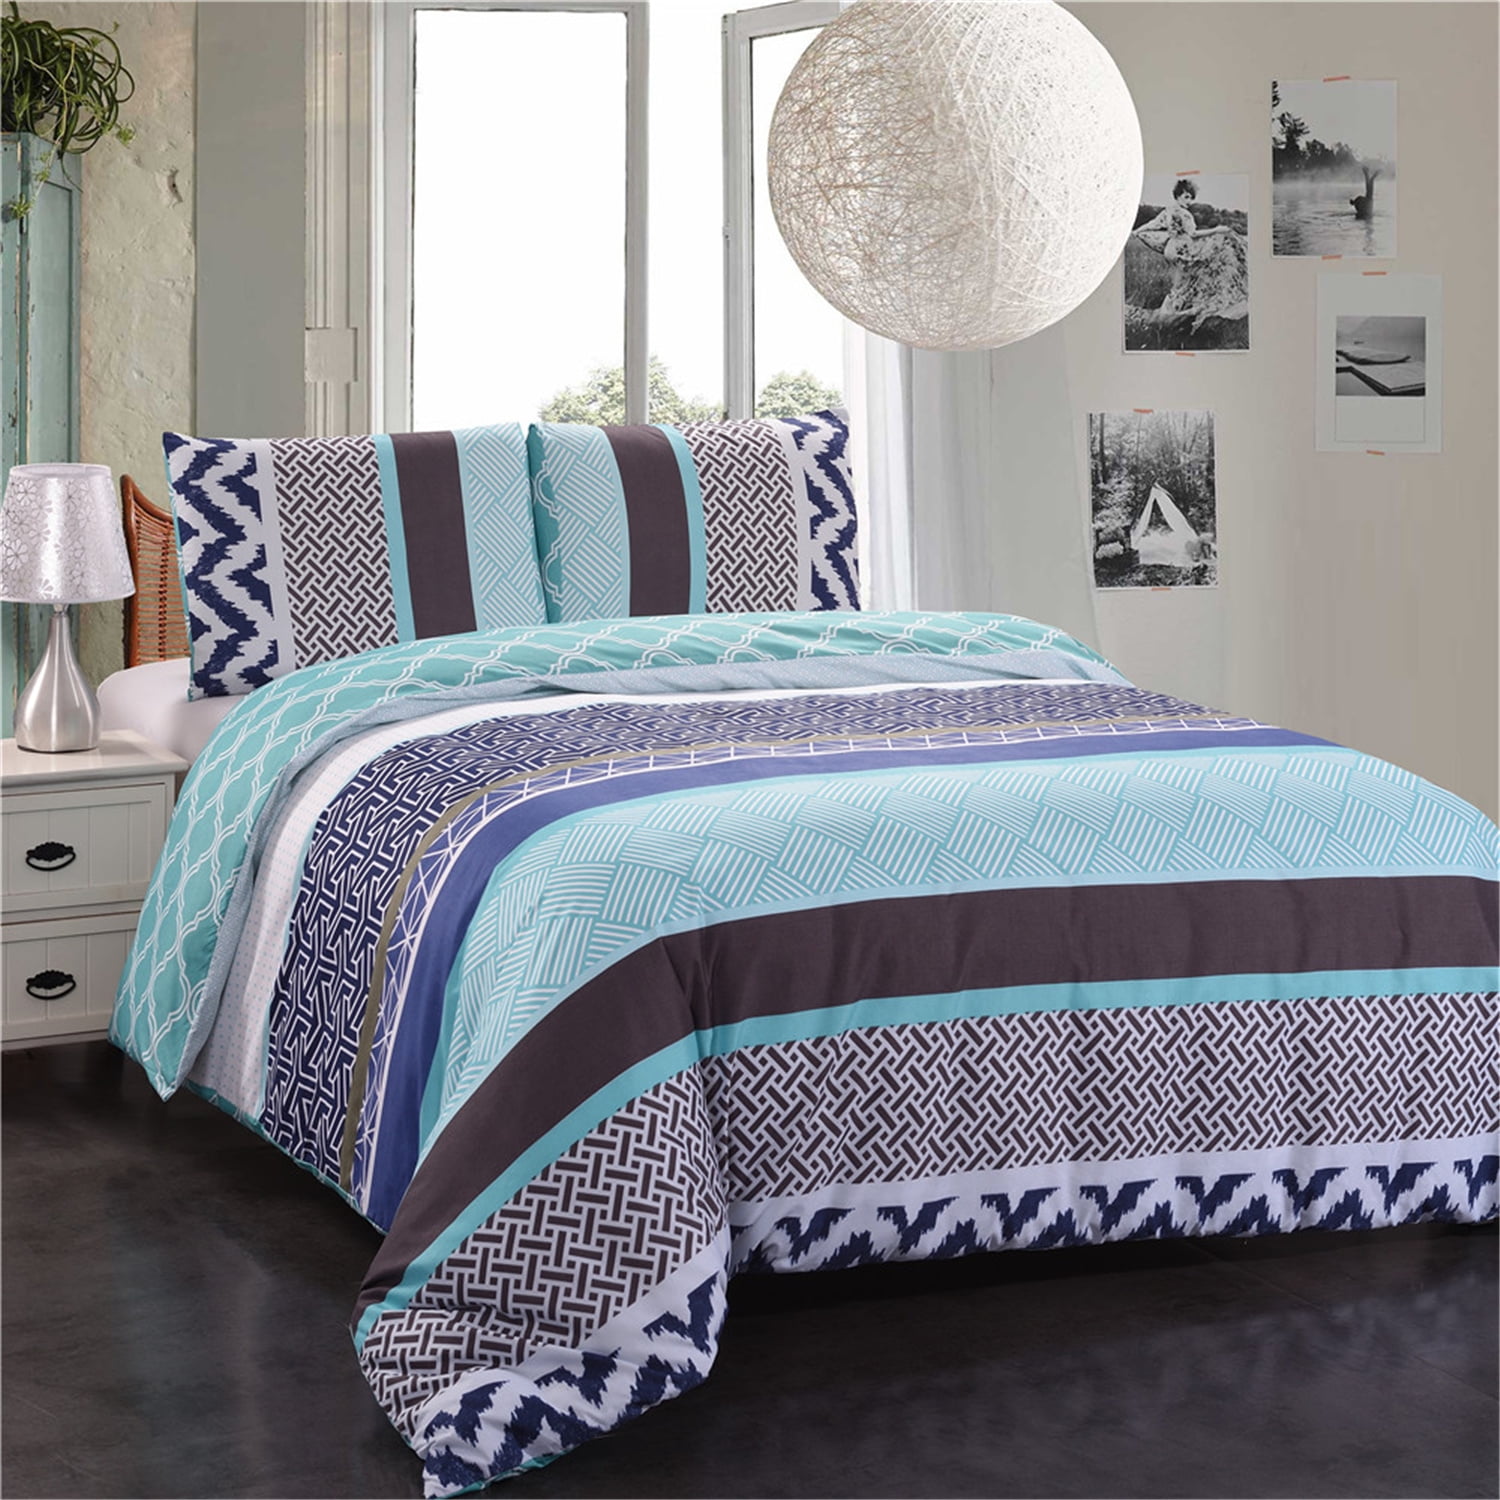 Details about   Paisley teal pink Duvet Cover with Pillow Case Quilt Cover Bedding Set All Sizes 